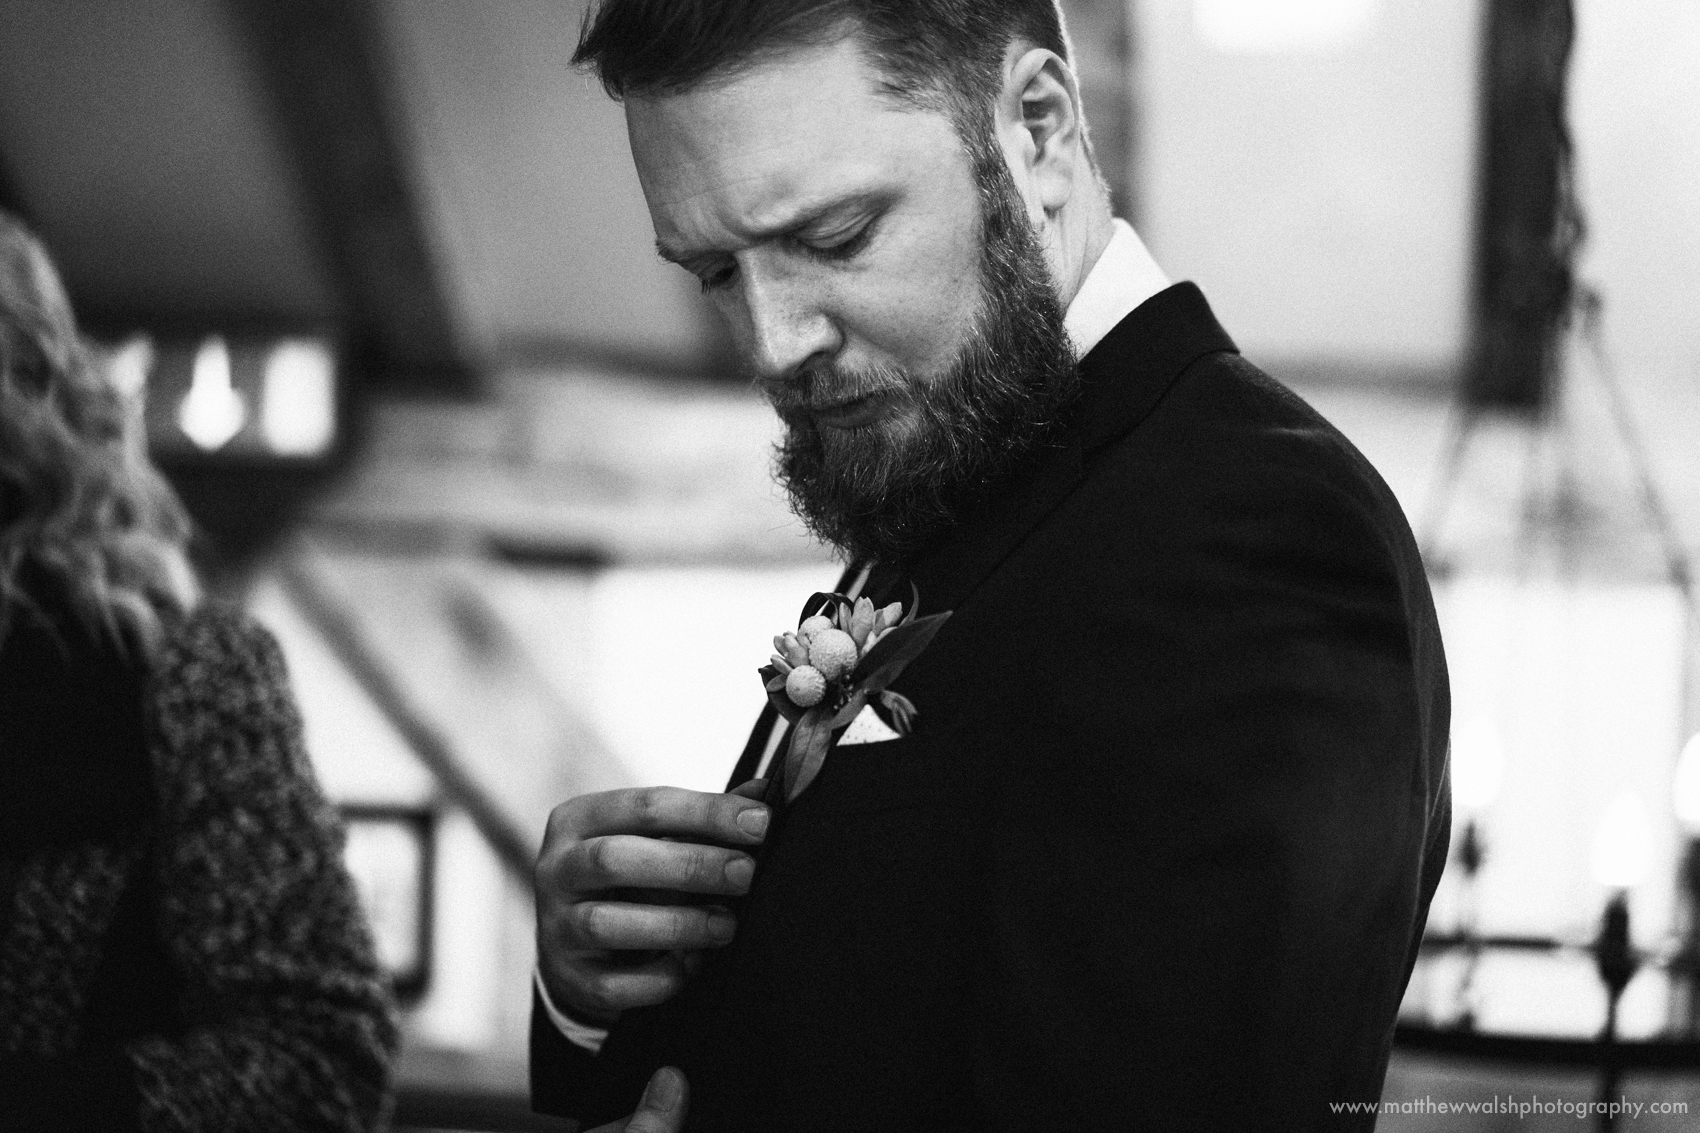 The Groom adjusts his buttonhole flower having just put it on